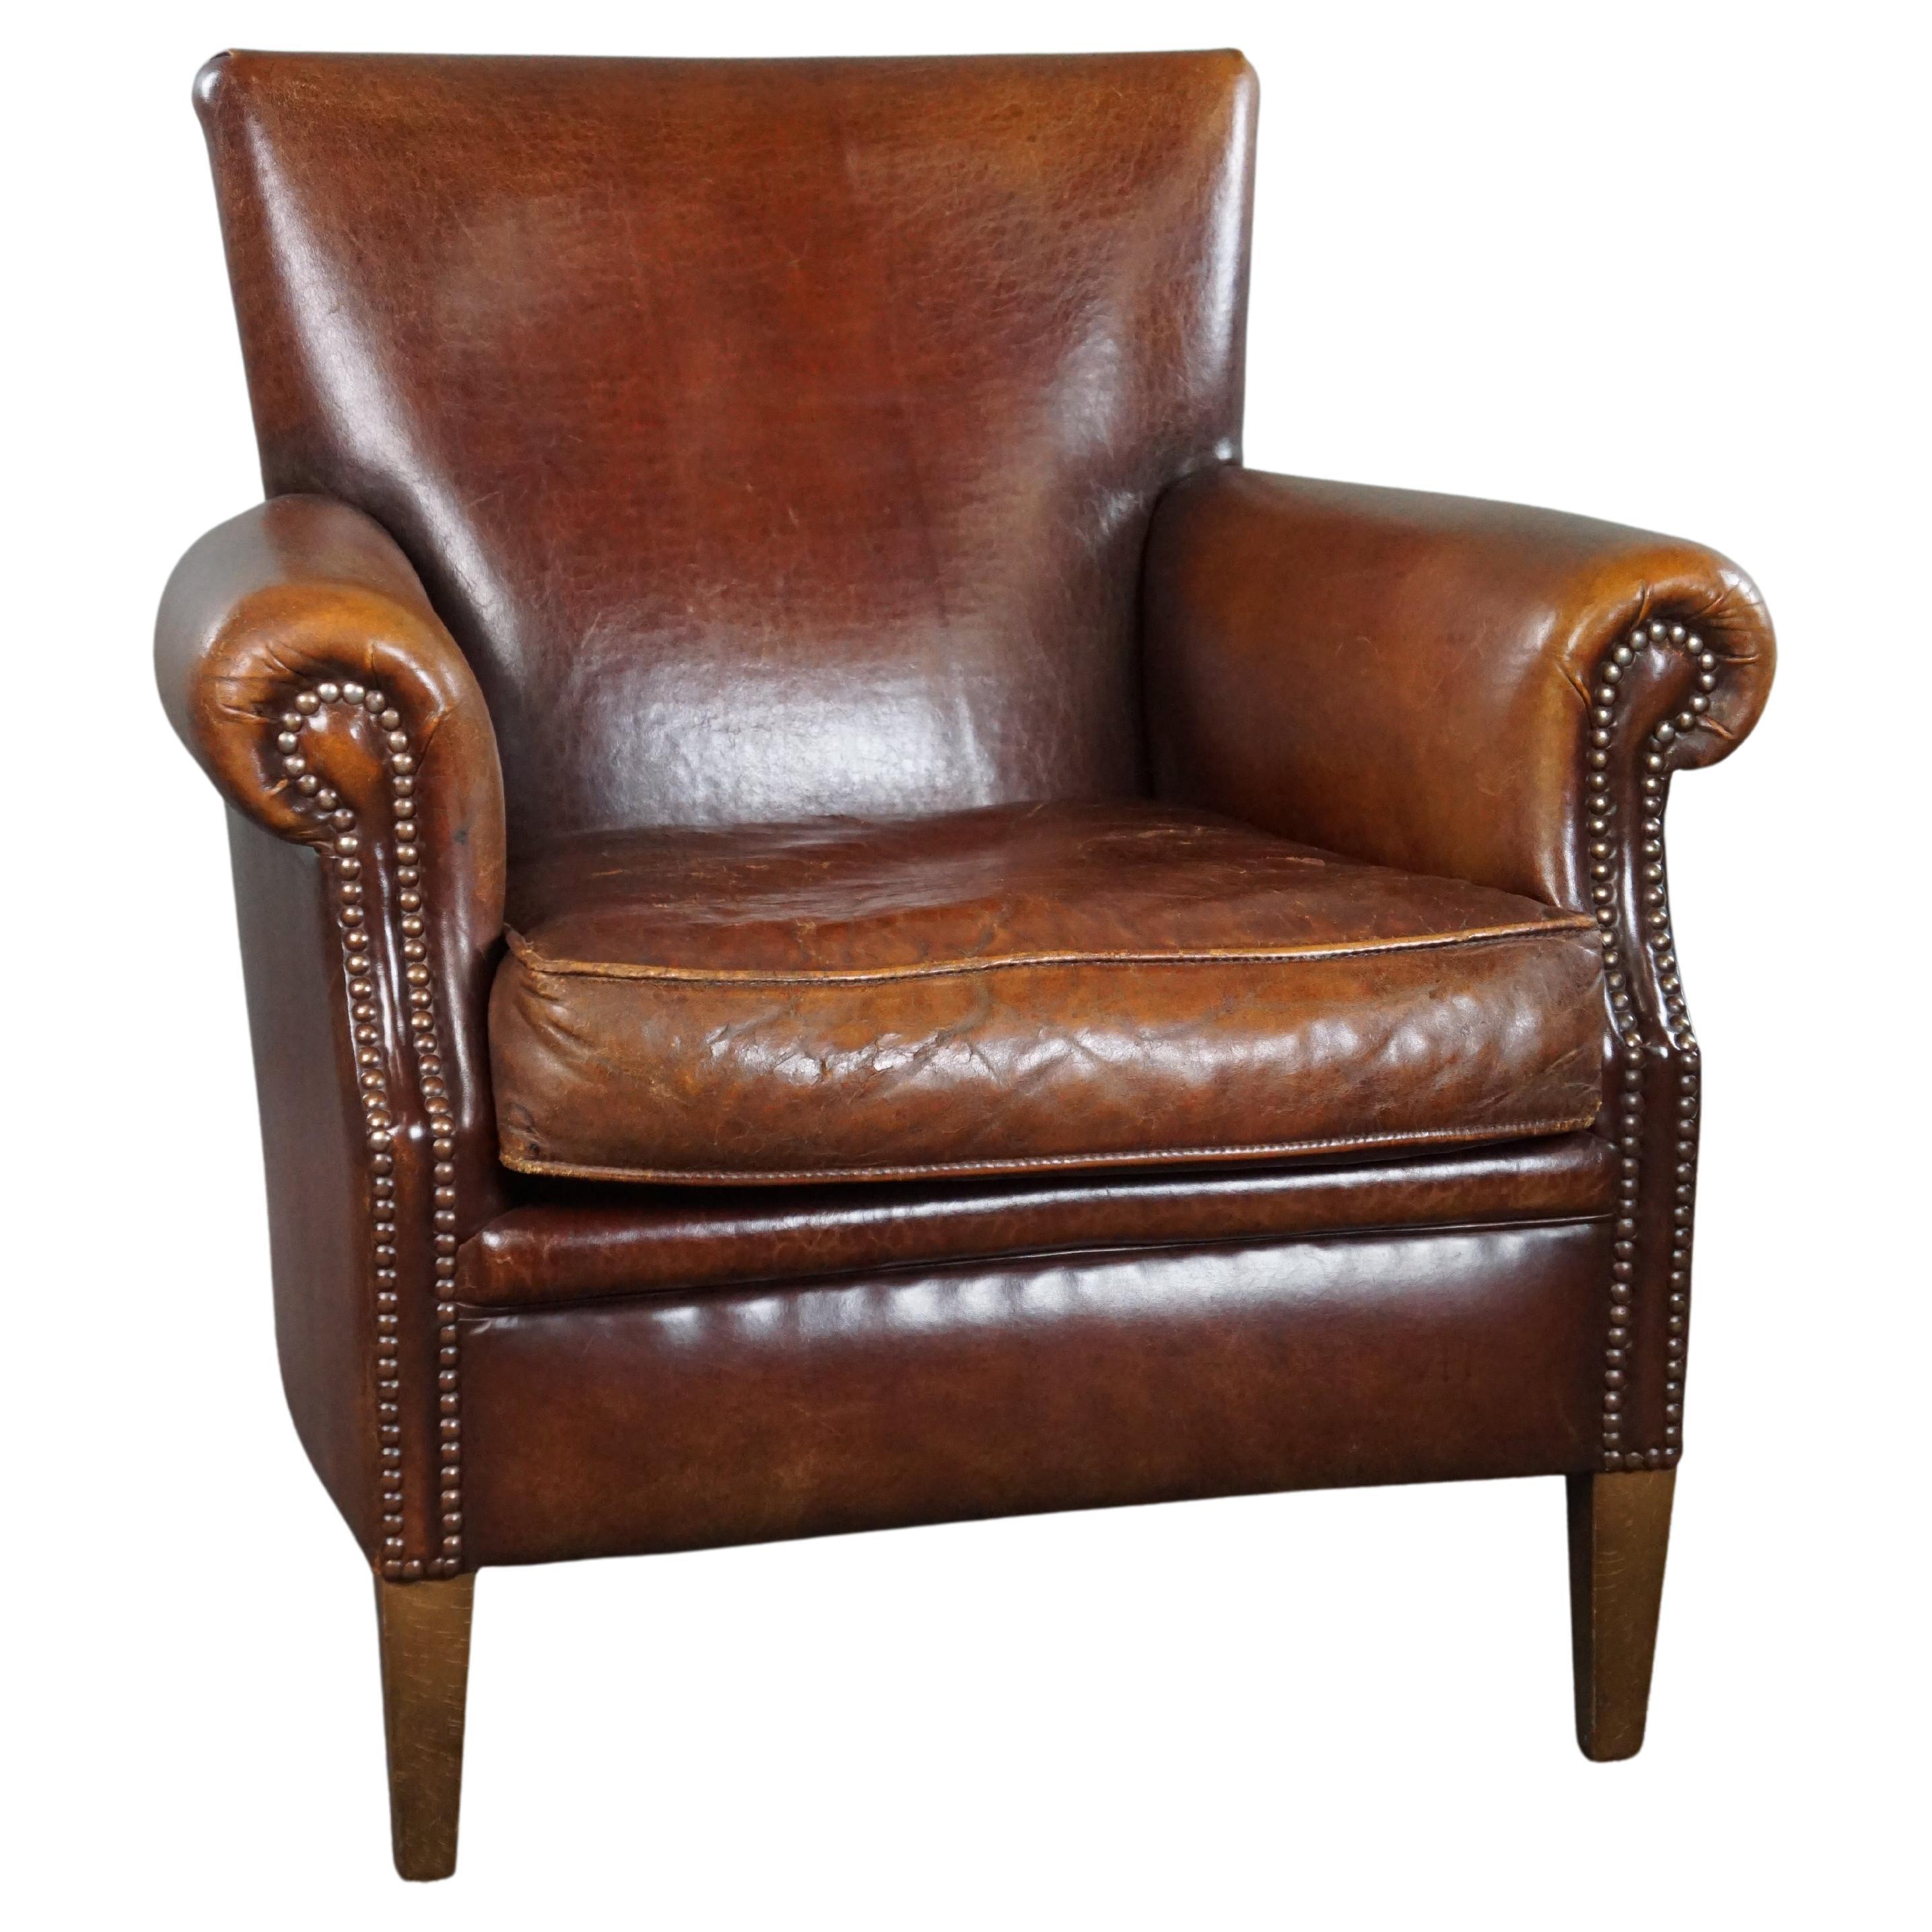 Sheepskin armchair with a wonderful patina and a correct worn look